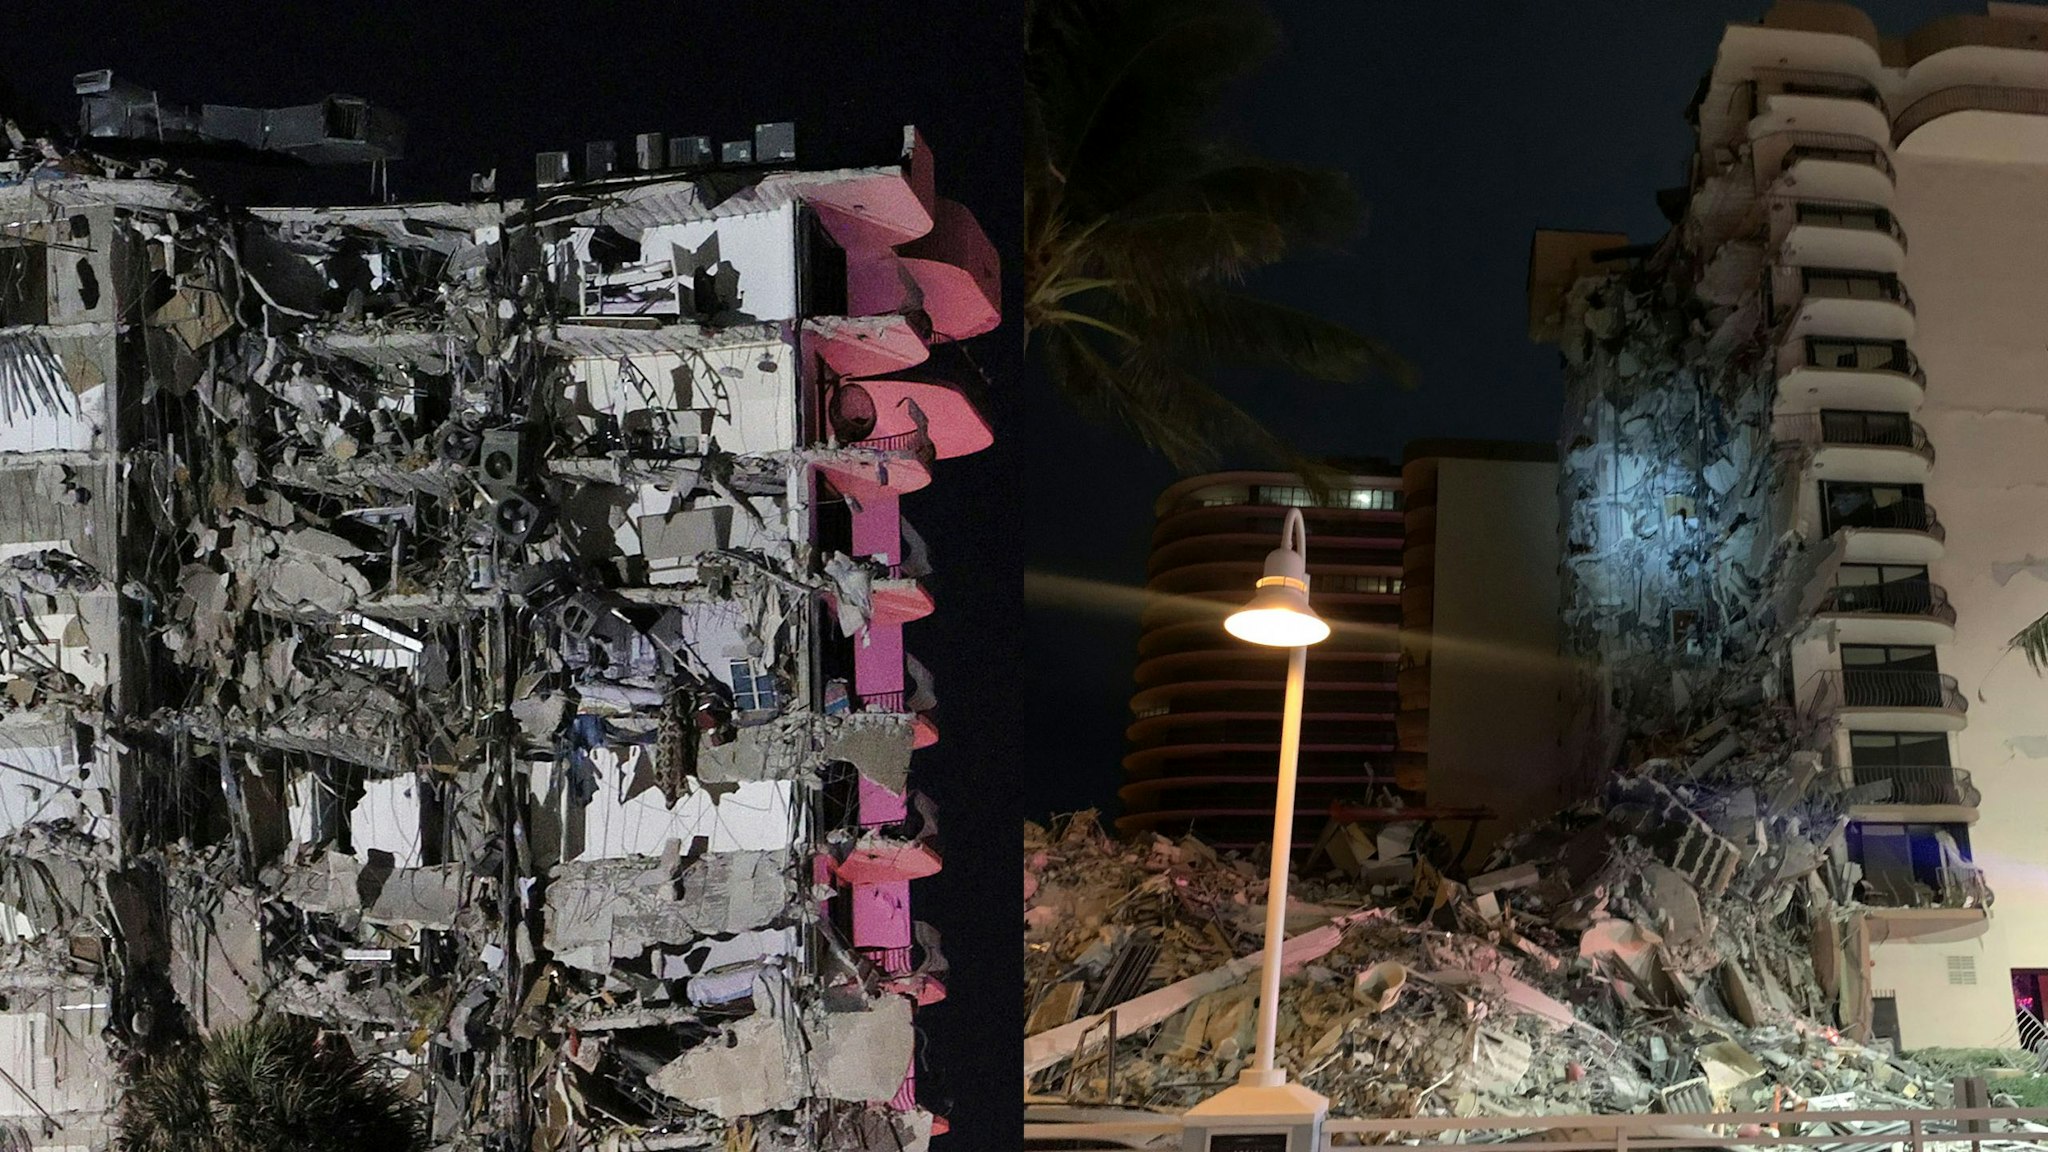 SURFSIDE, FLORIDA - JUNE 24: A portion of the 12-story condo tower crumbled to the ground following a partial collapse of the building on June 24, 2021 in Surfside, Florida. It is unknown at this time how many people were injured as search-and-rescue effort continues with rescue crews from across Miami-Dade and Broward counties.